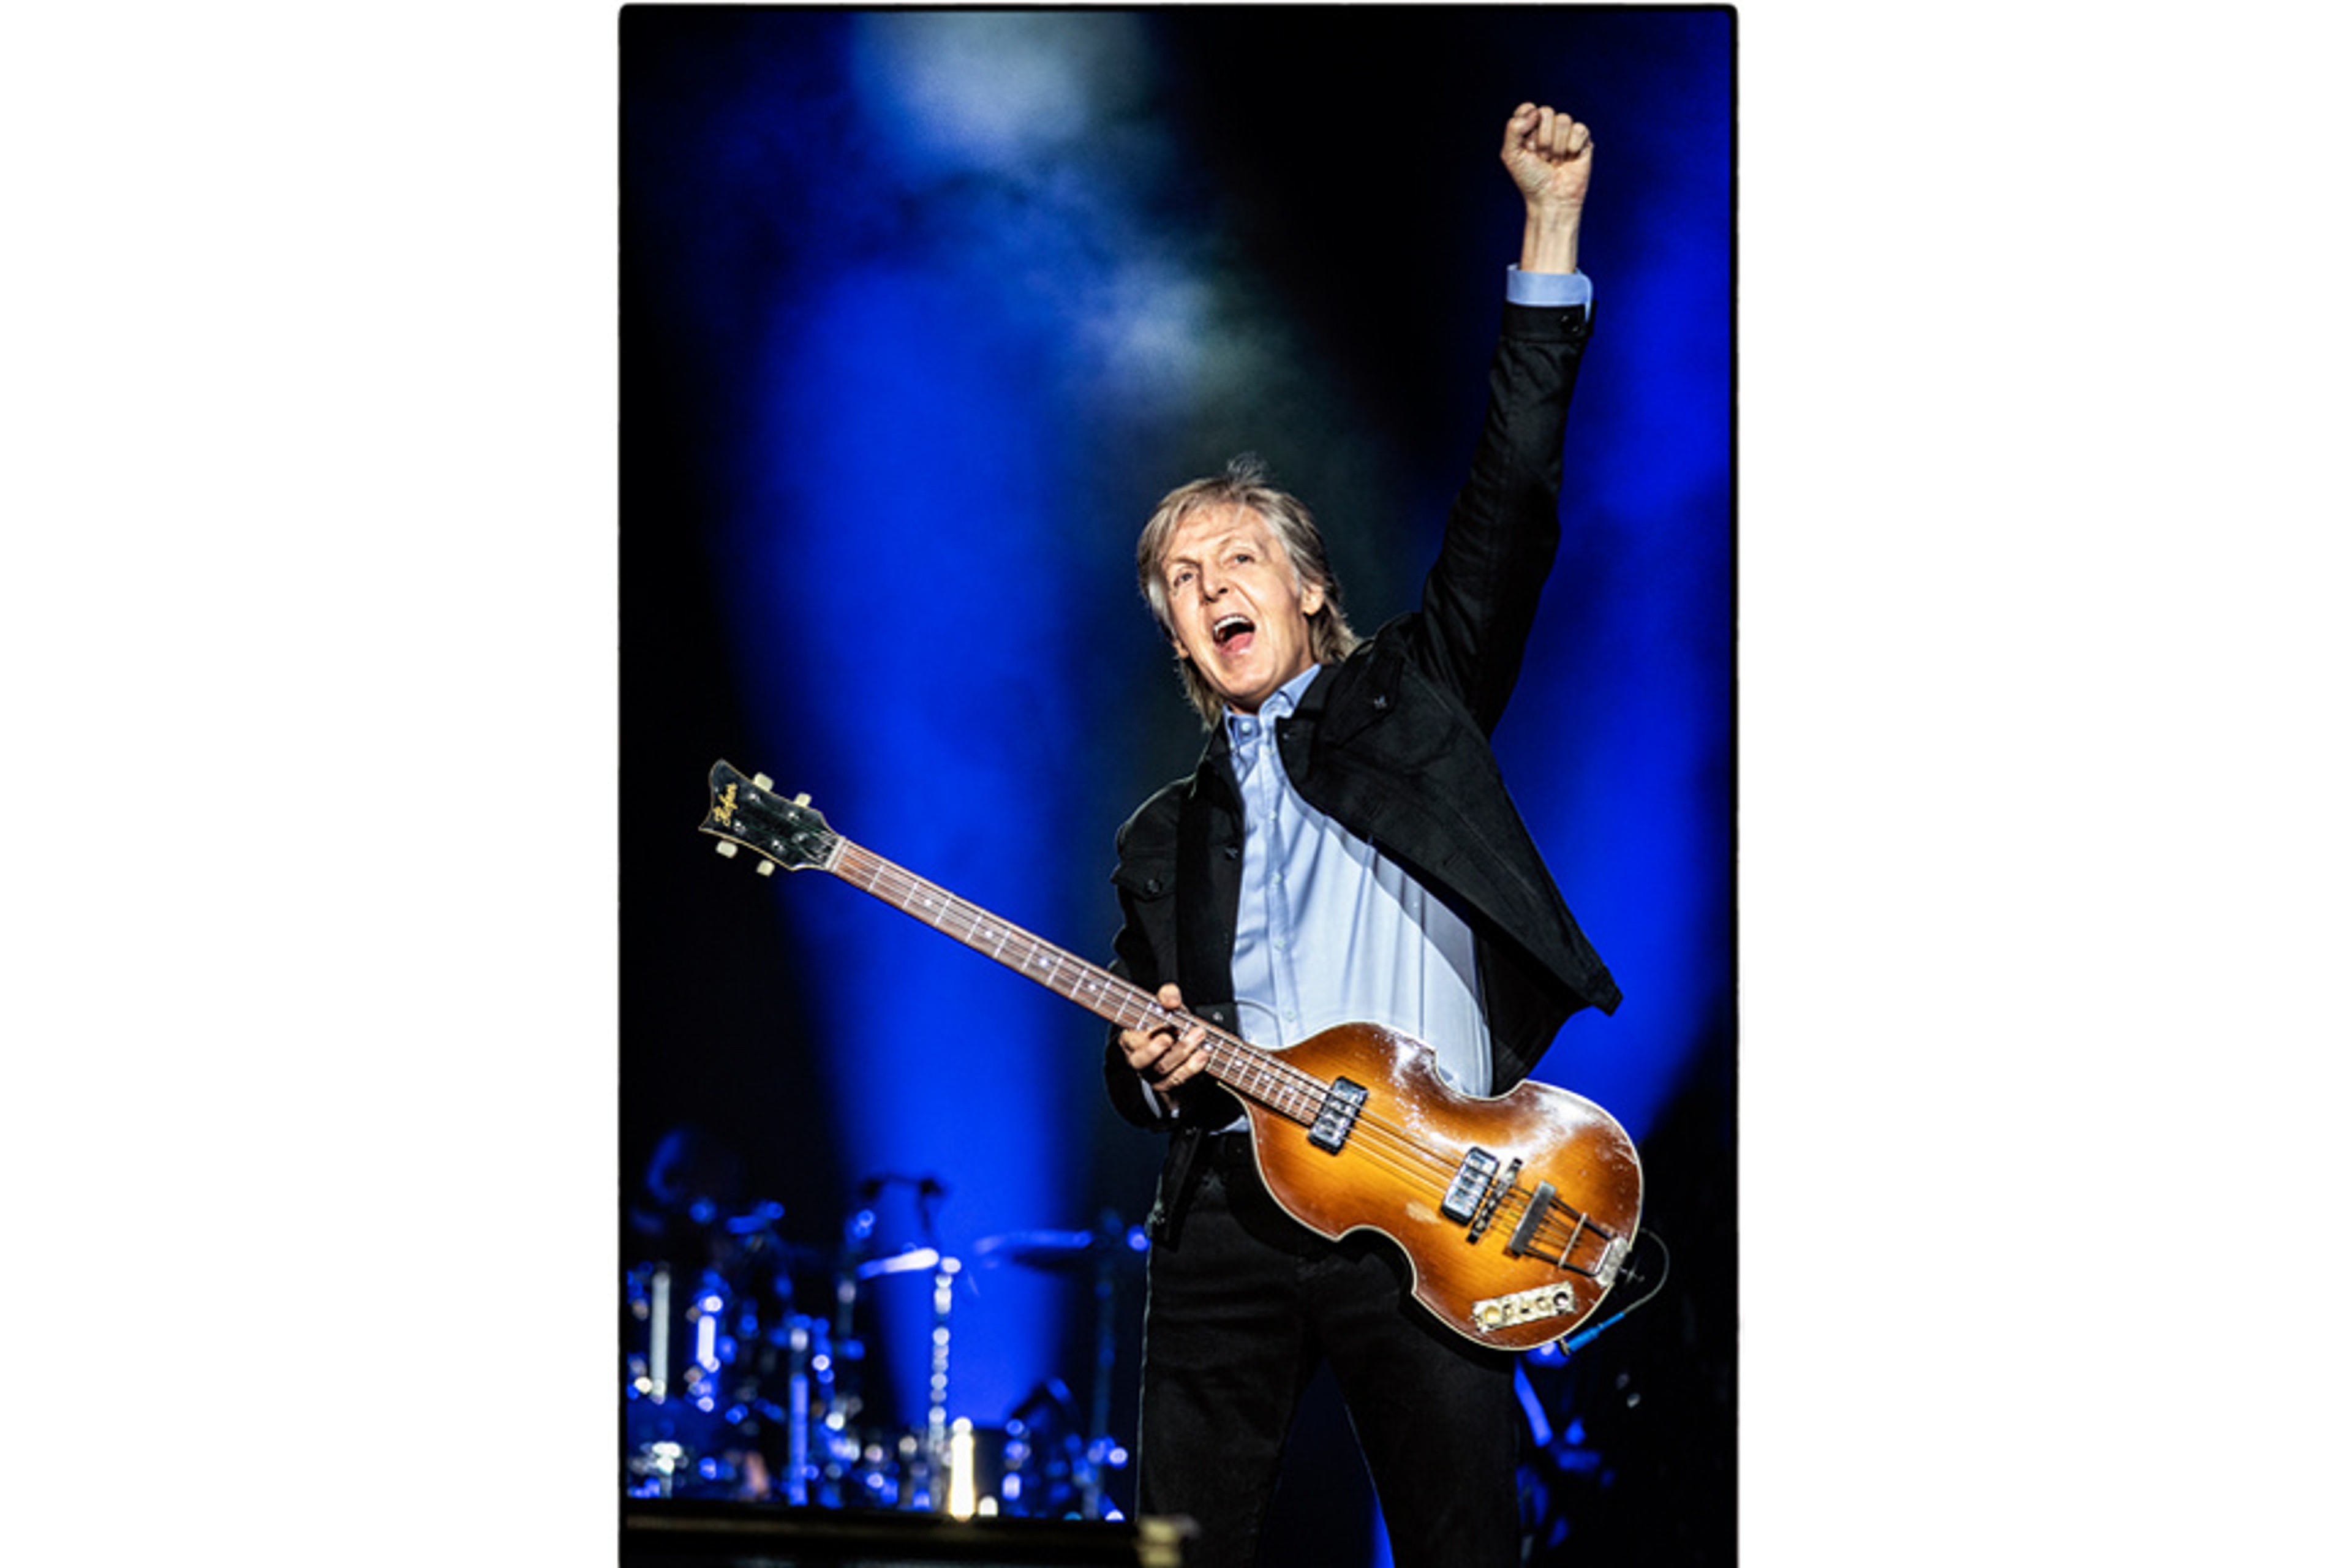 Photo of Paul performing at San Diego in 2019